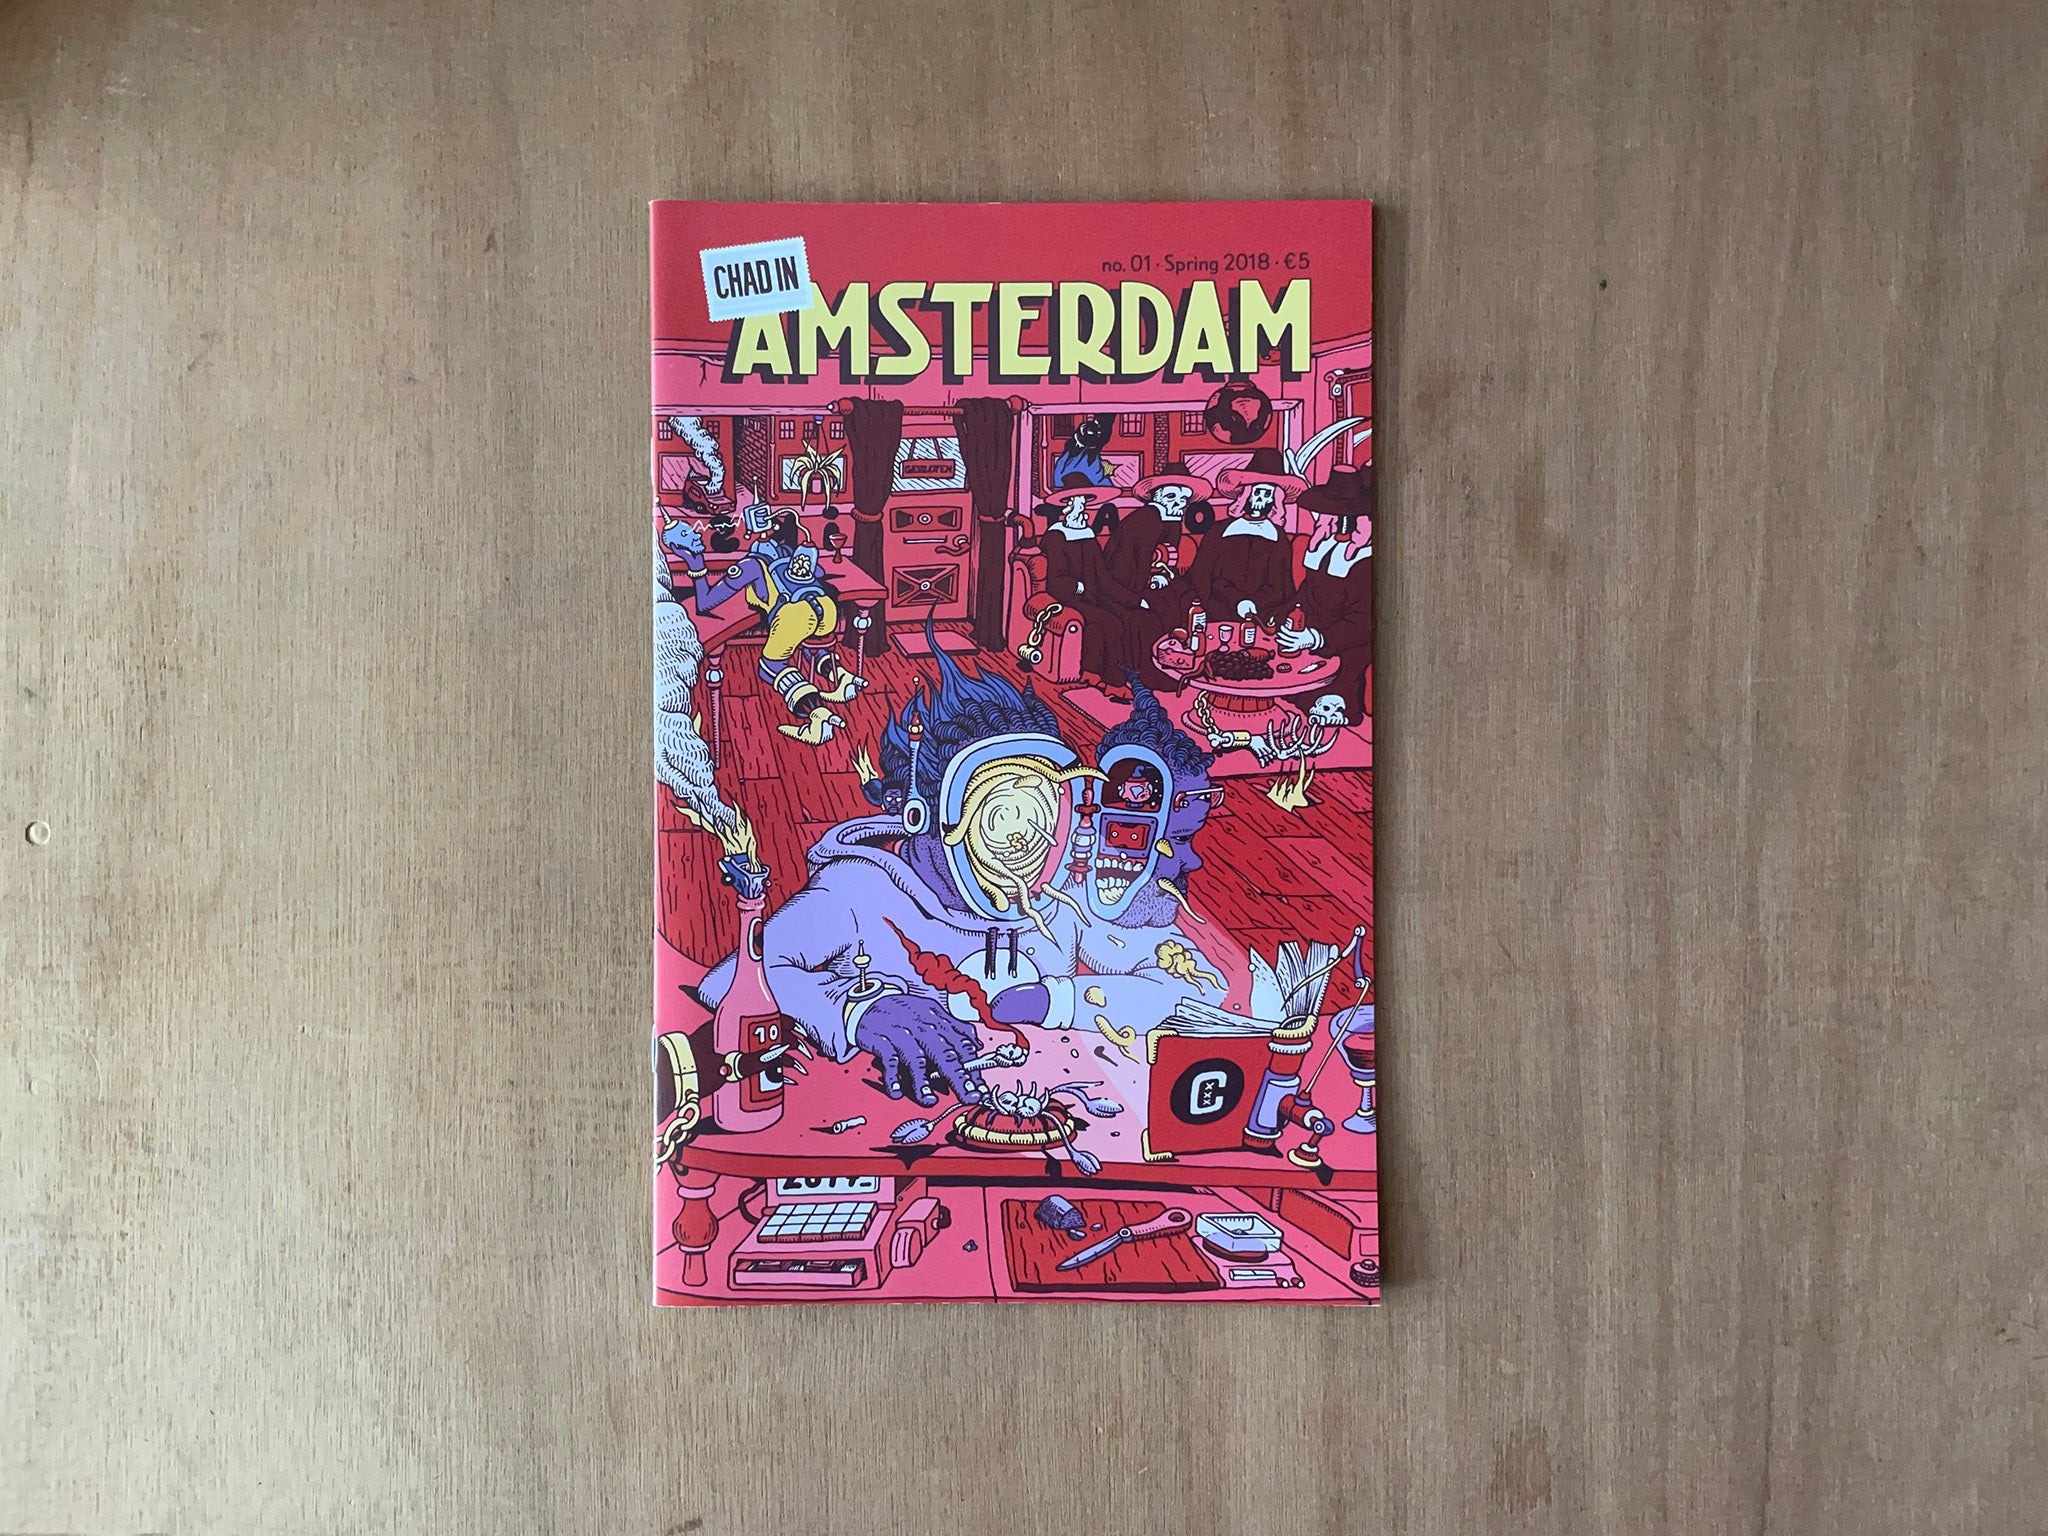 CHAD IN AMSTERDAM NO. 1 by Various Artists